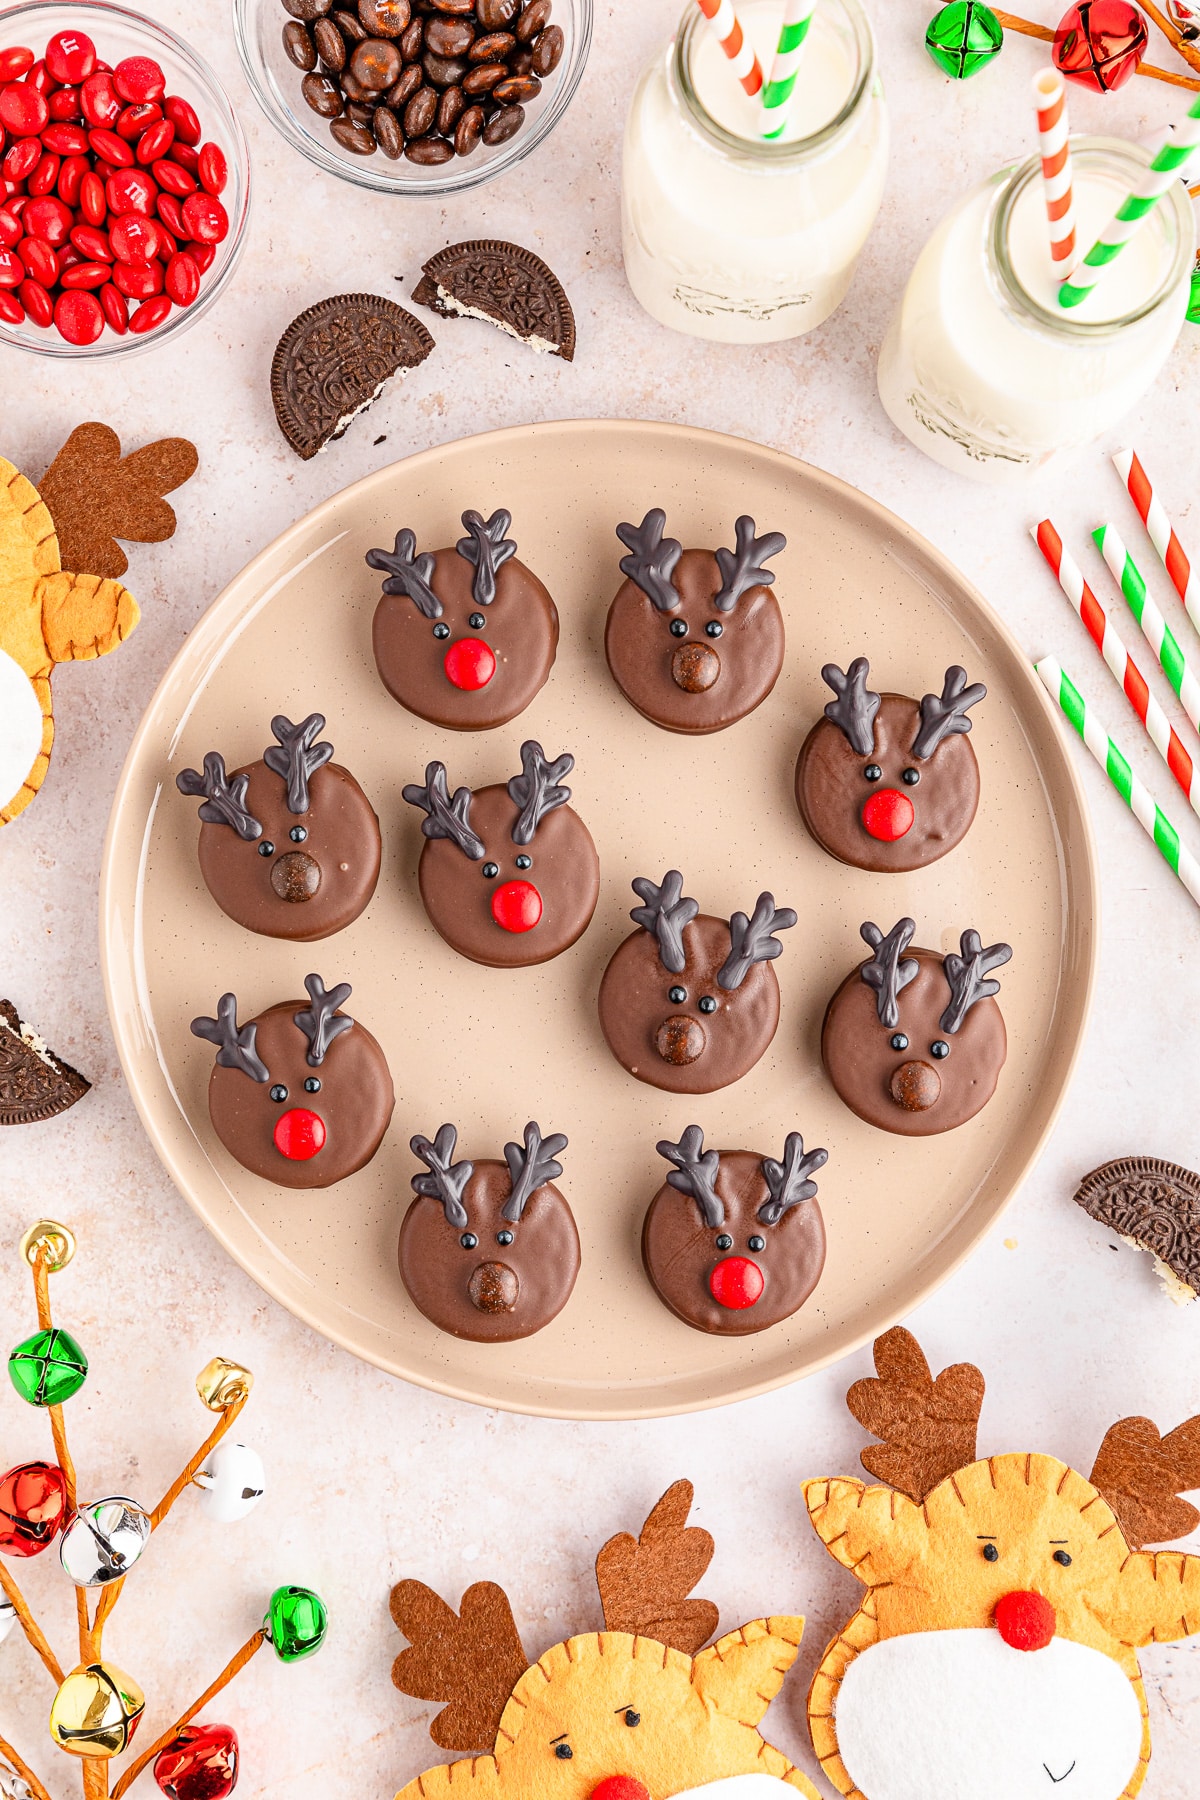 Chocolate reindeer oreo cookies on a plate with more holiday decorations and milk nearby.